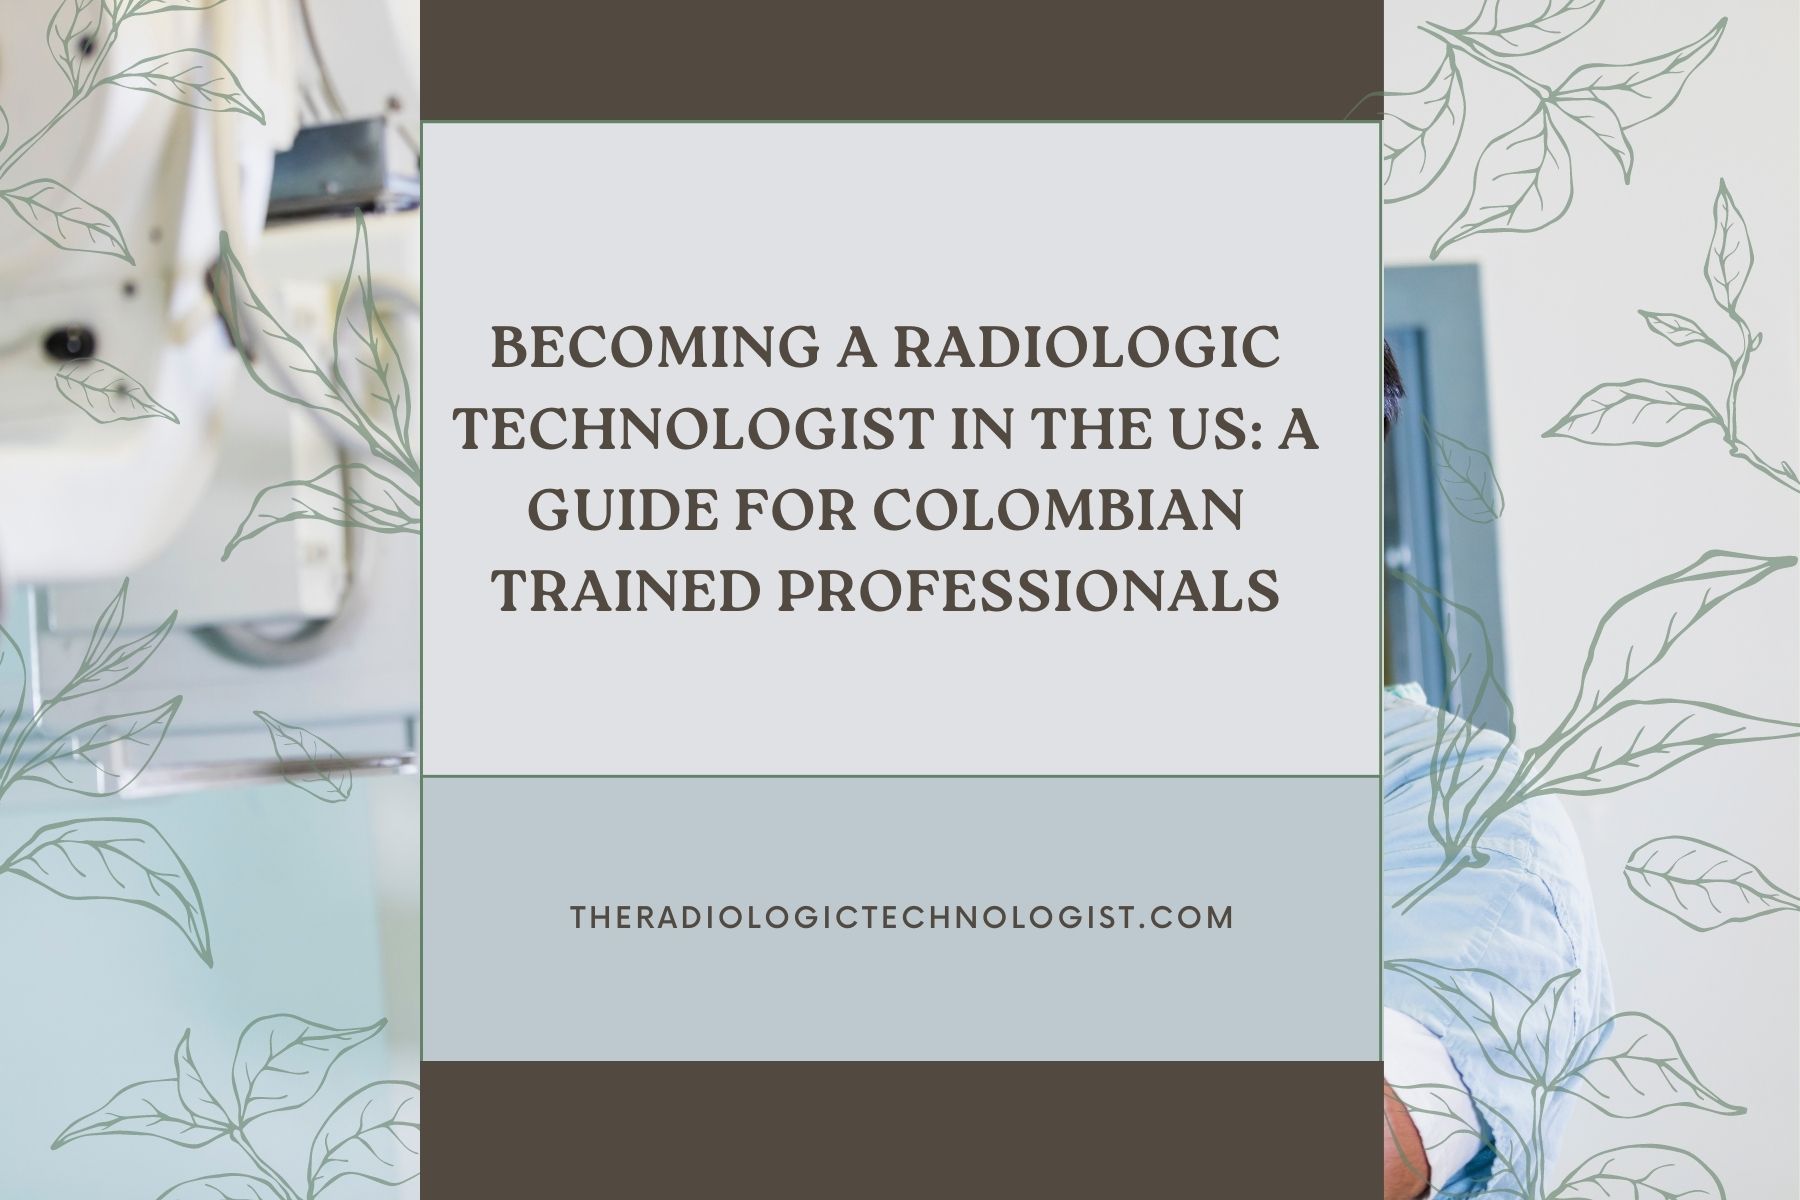 Becoming a Radiologic Technologist in the US: A Guide for Colombian Trained Professionals